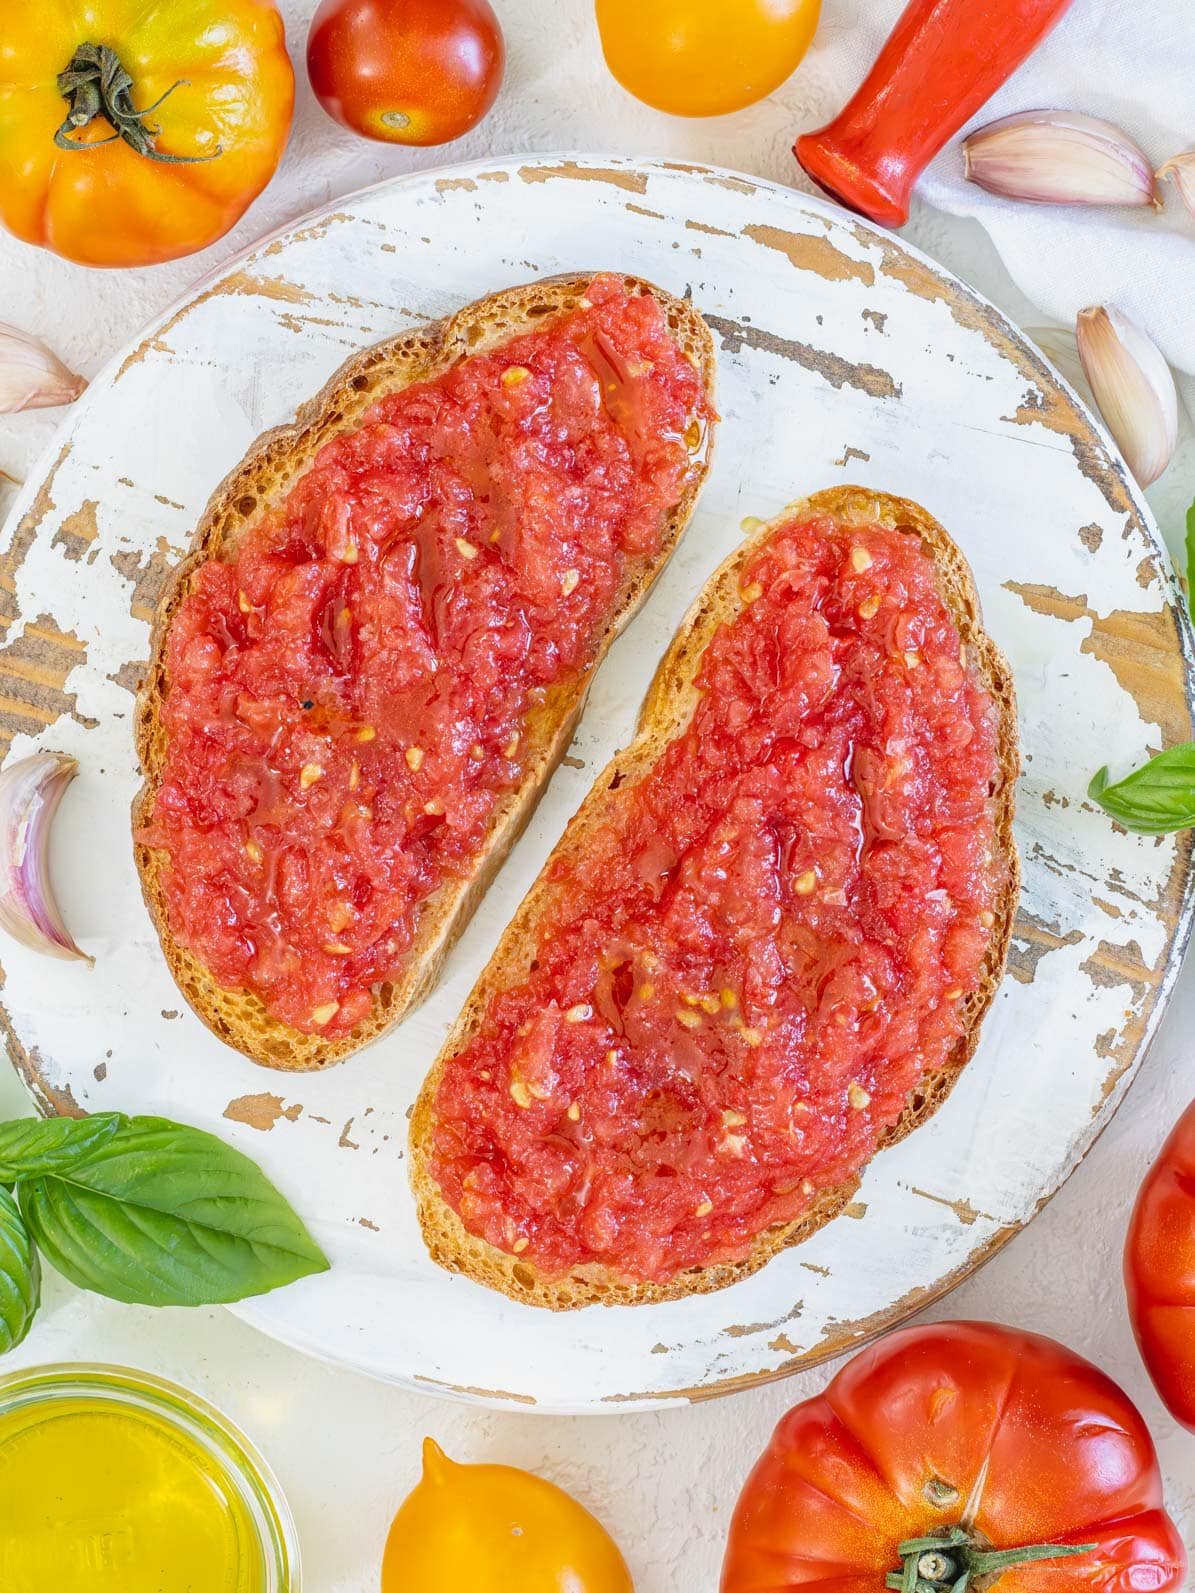 Spanish pan con tomato with grated tomatoes